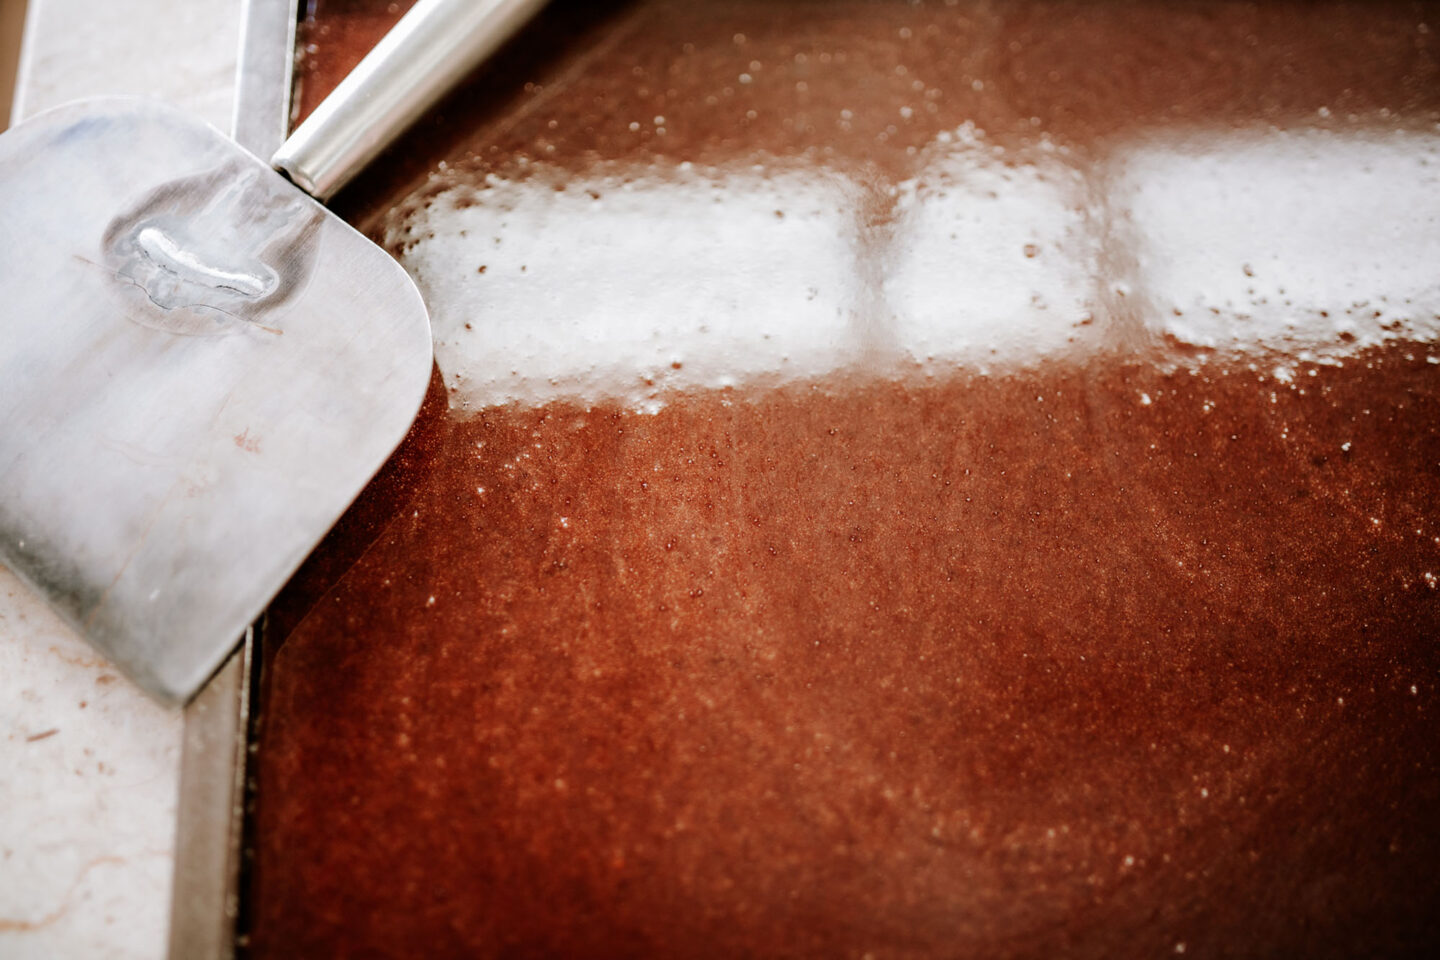 Fudge being made at Ryba's Fudge Shop - fudge cooling in frame